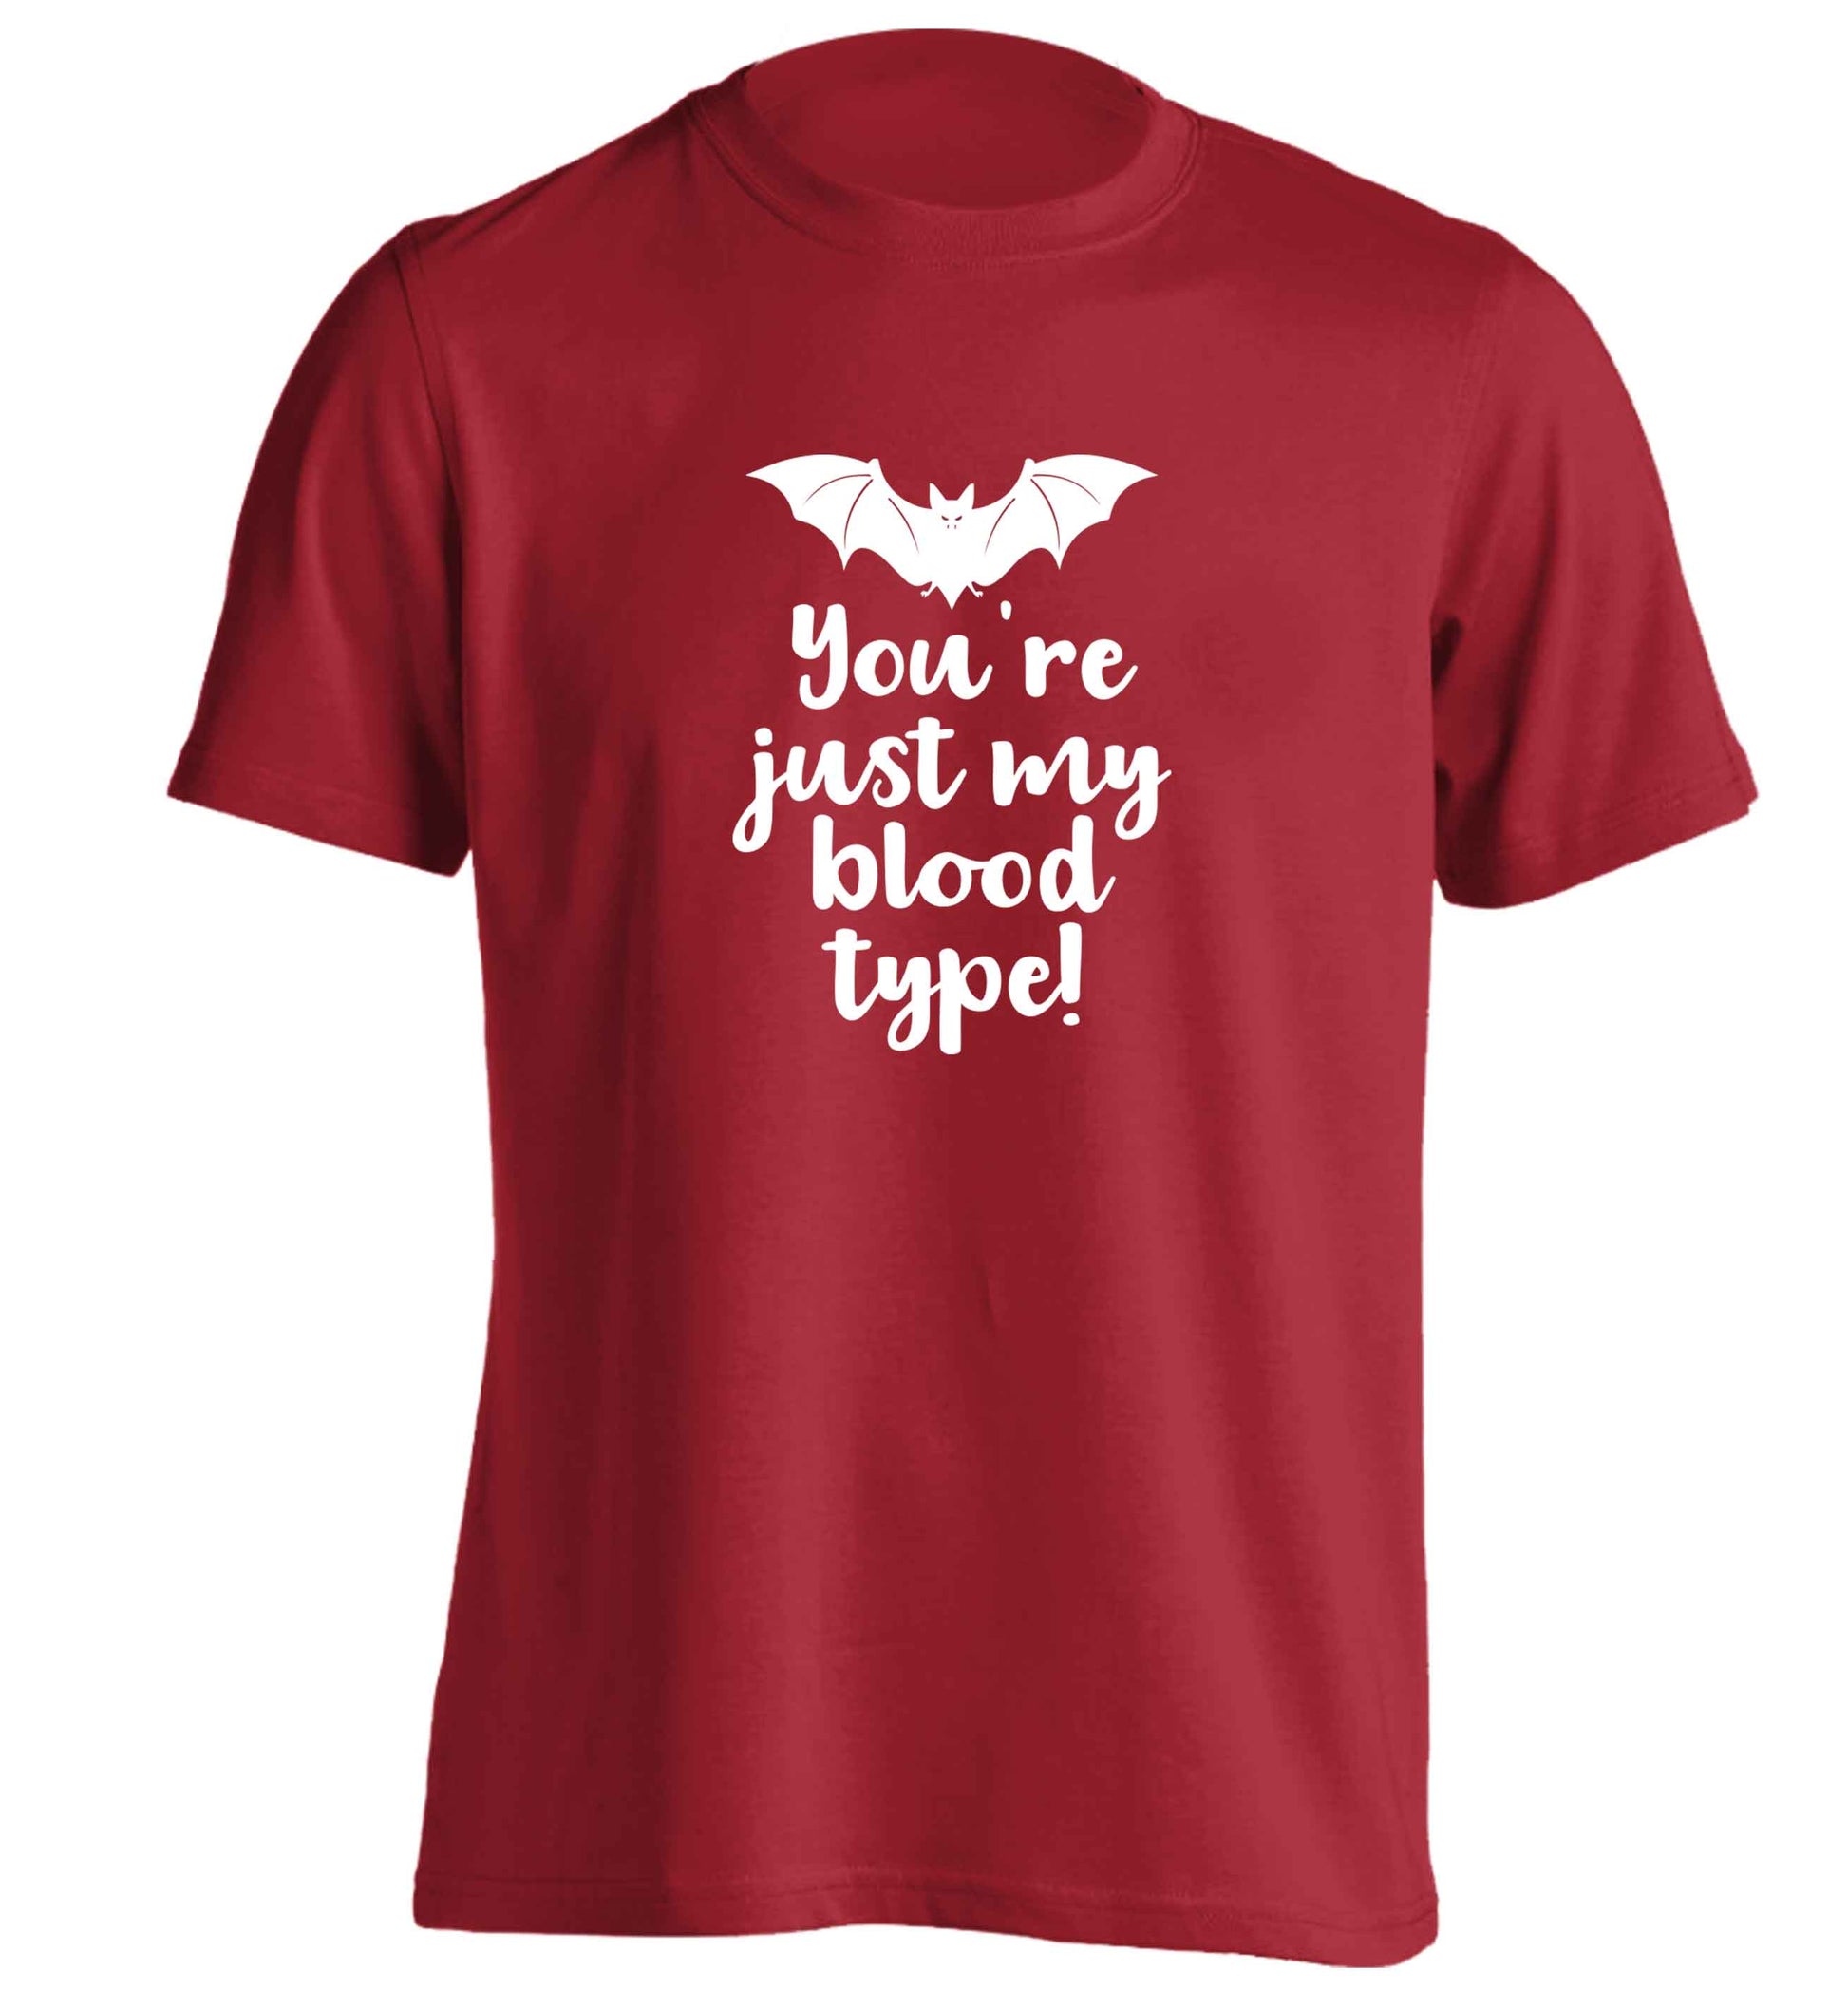 You're just my blood type adults unisex red Tshirt 2XL